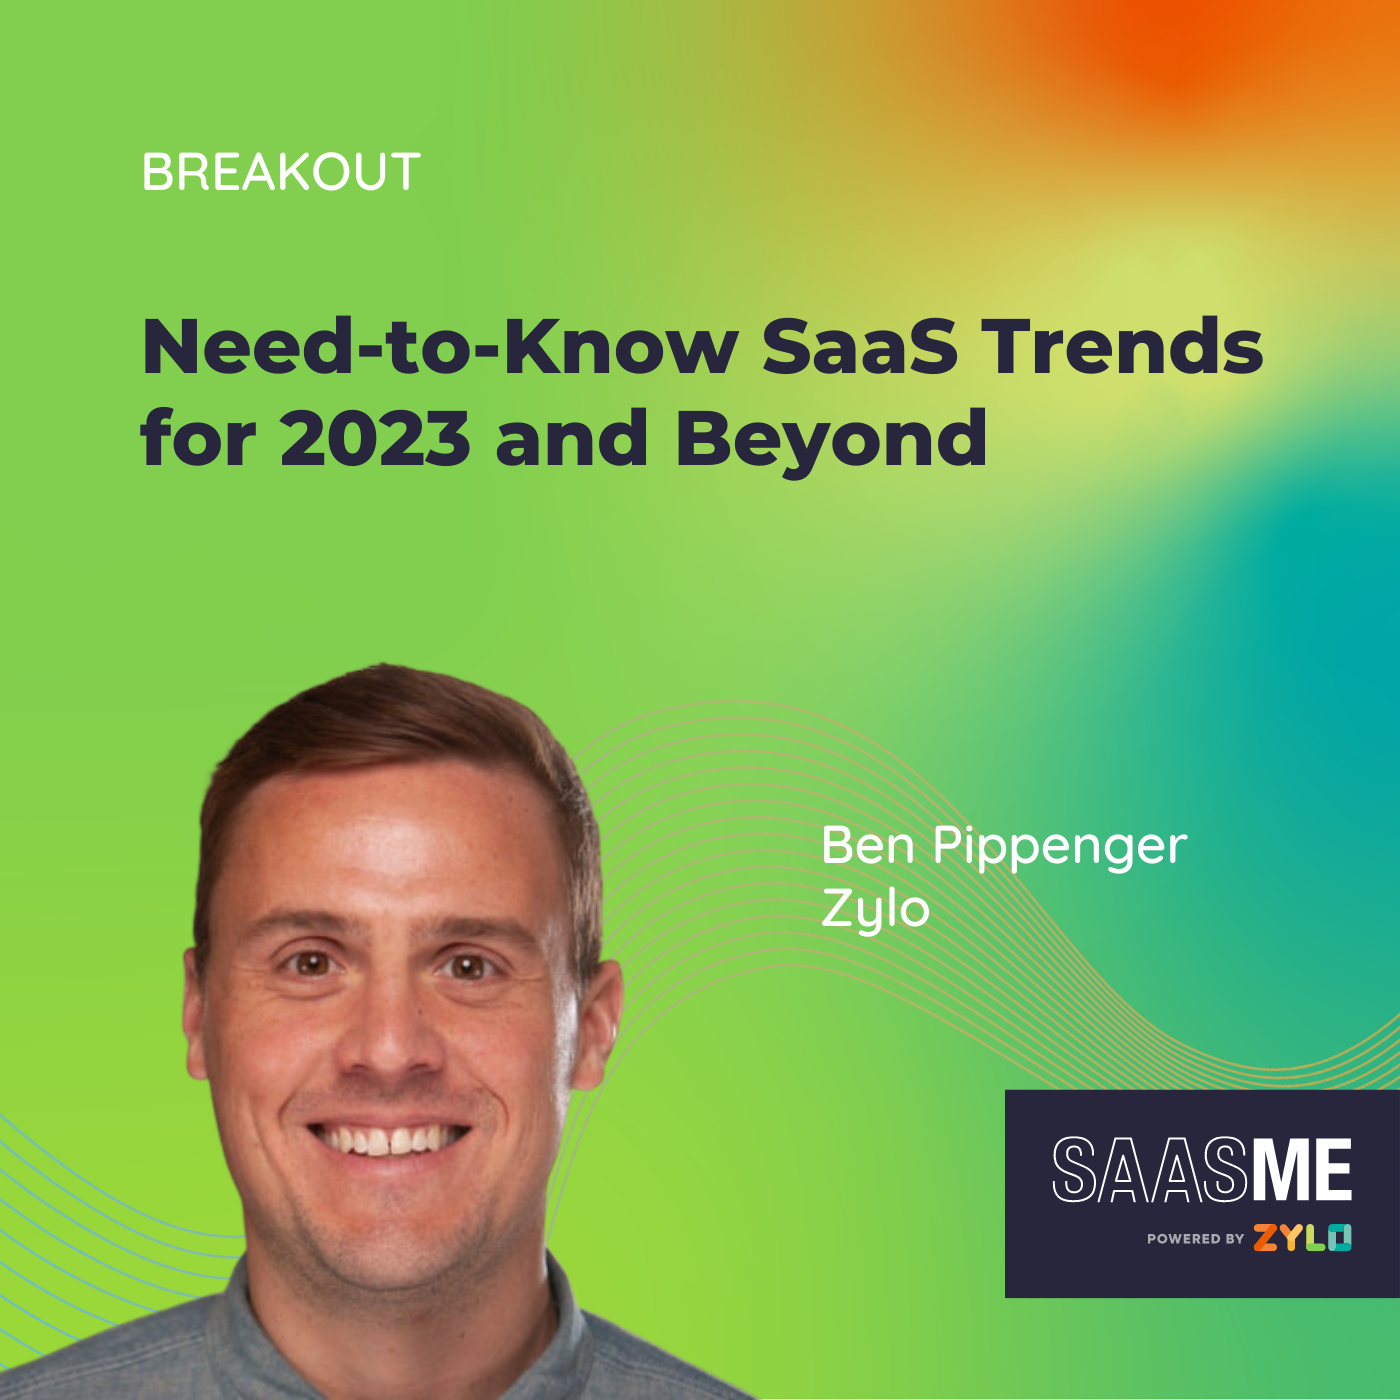 Need-to-Know SaaS Trends for 2023